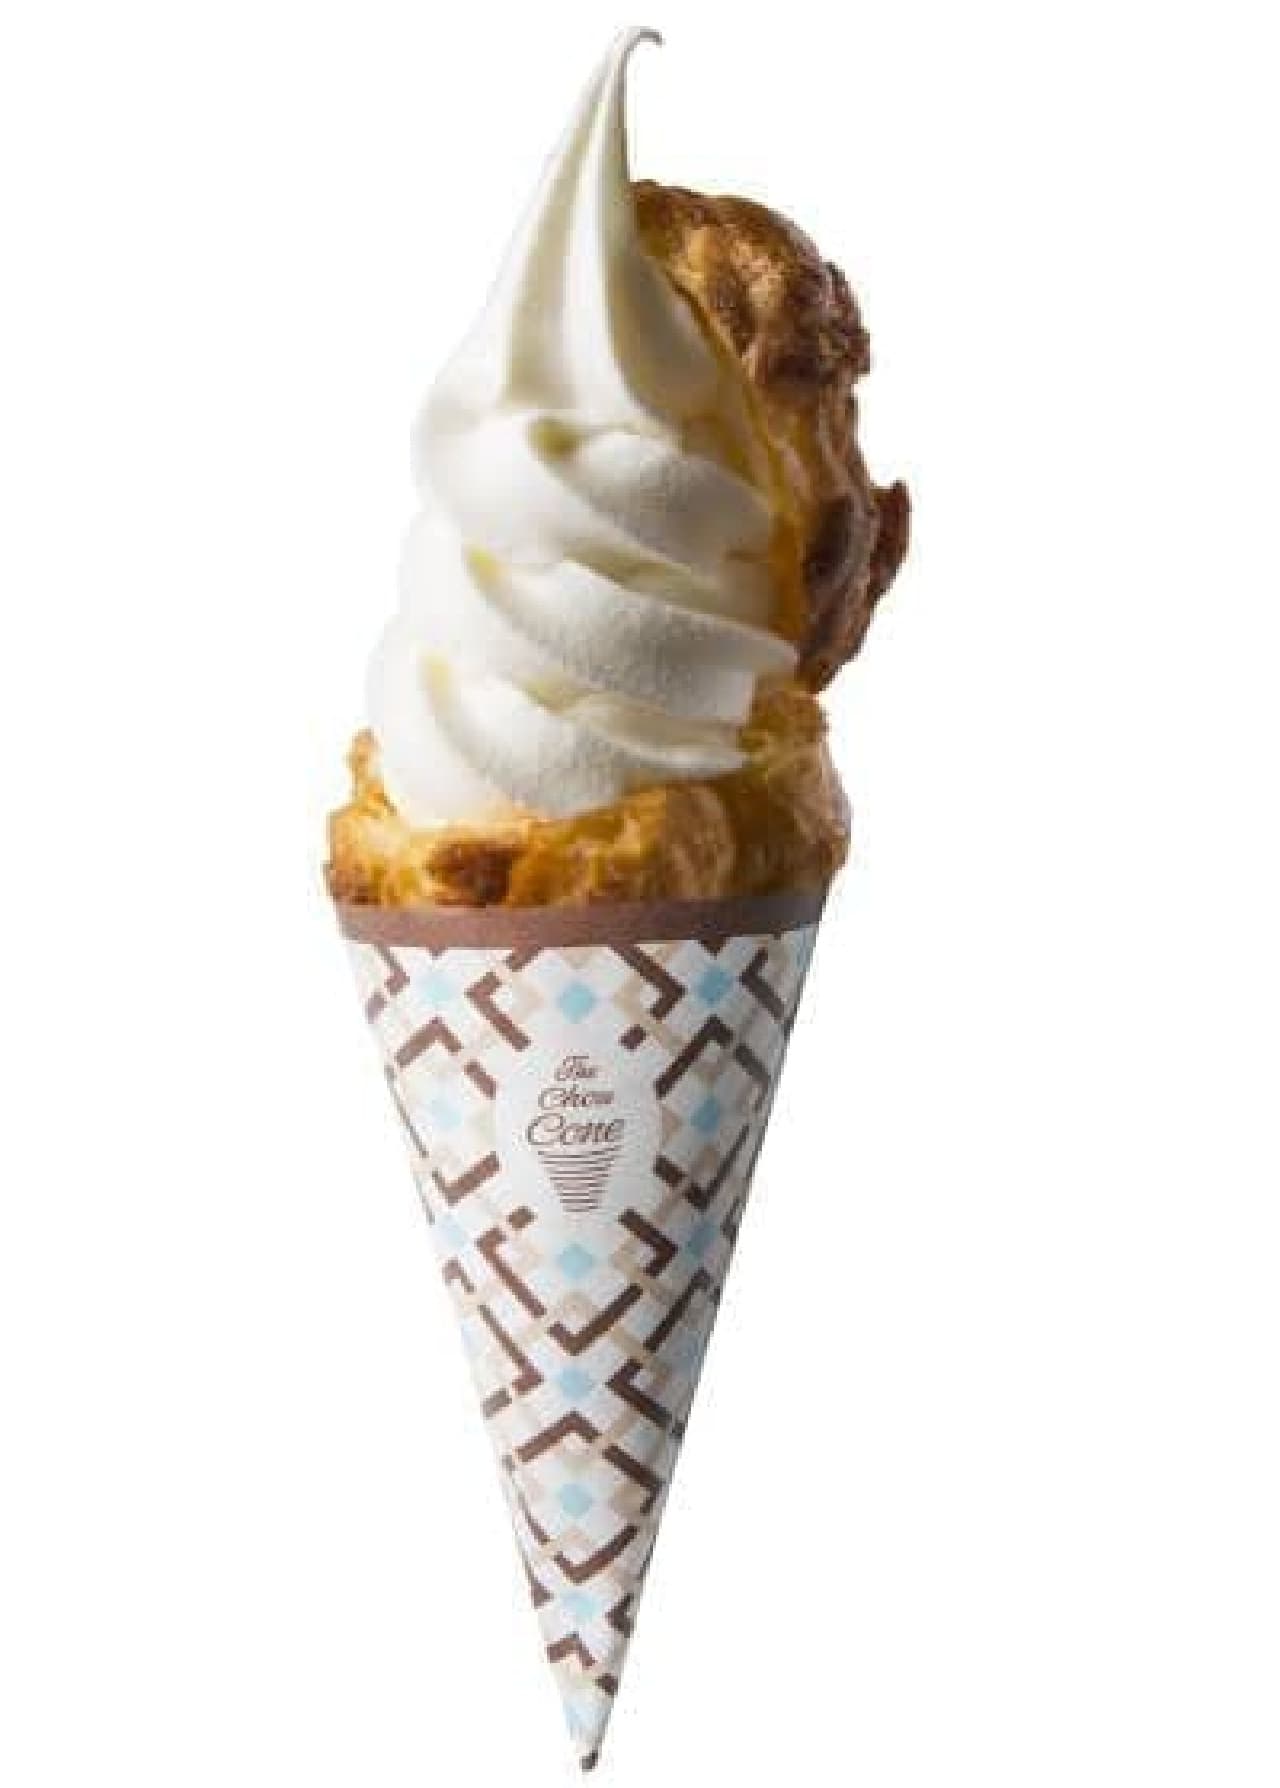 "The Shoe Corn Soft" is a sweet that is topped with soft serve ice cream on The Shoe Corn.